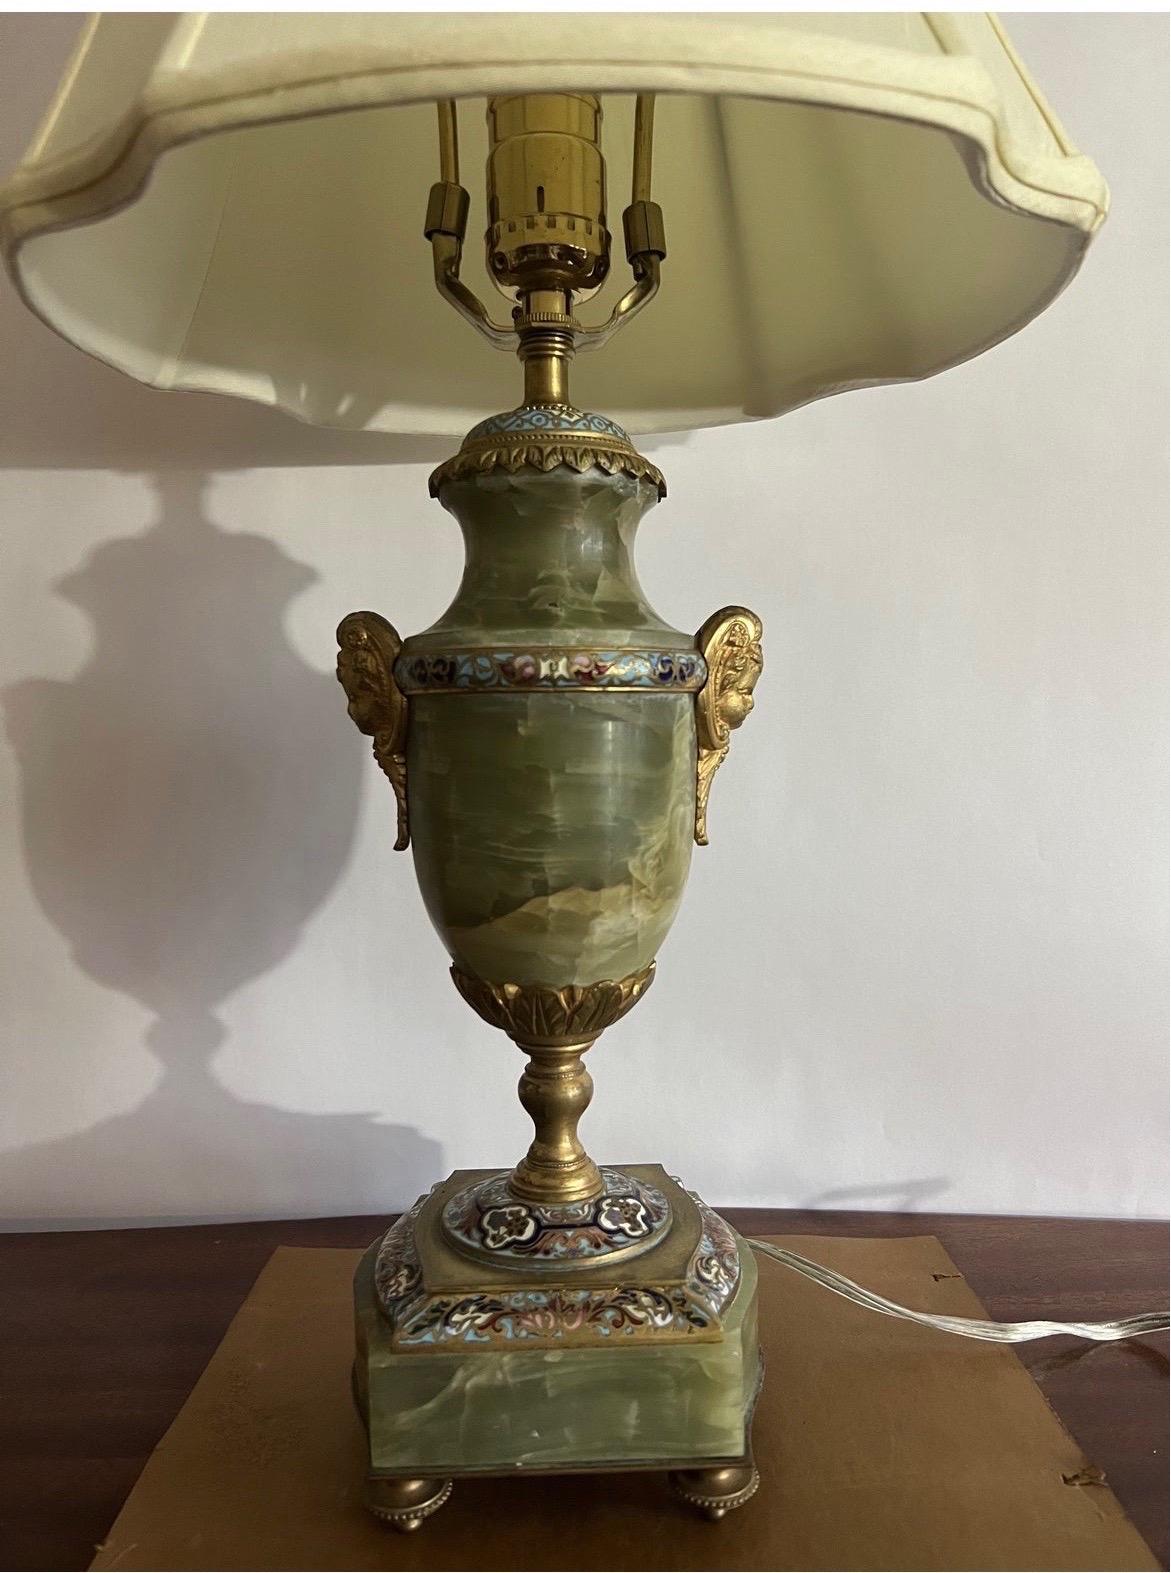 Beautiful HEAVY table lamp with green onyx stone, gilt bronze mounts depicting cherubs and multi colored french champleve enamel to body. Marked “France” to bottom
21” measurement includes harp/finial.